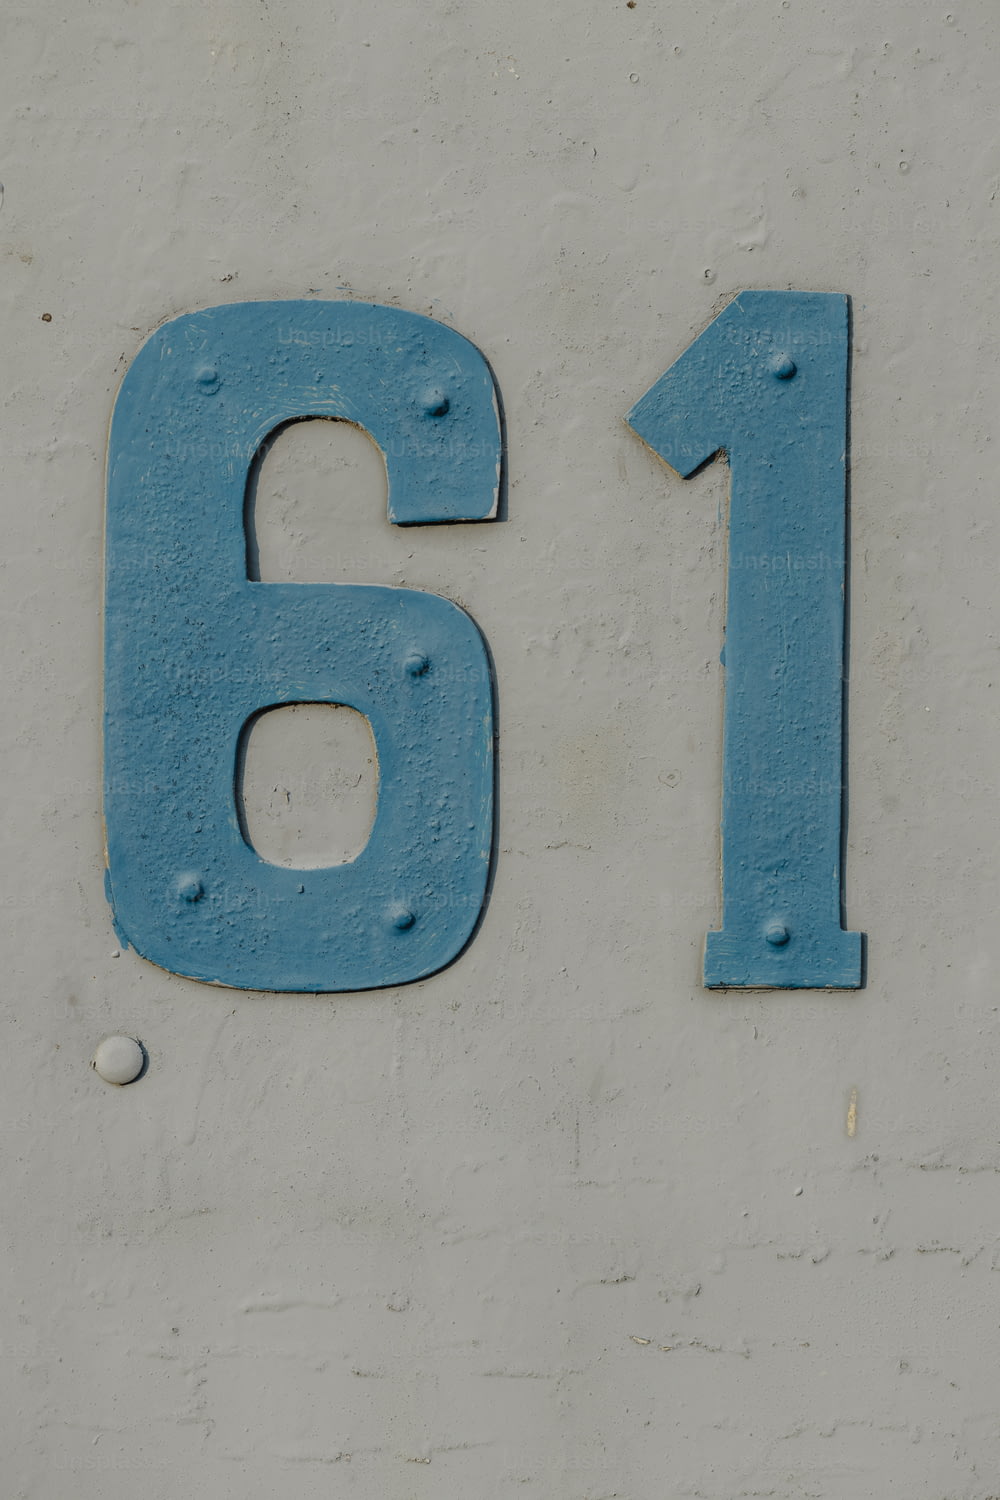 a close up of a number on a wall